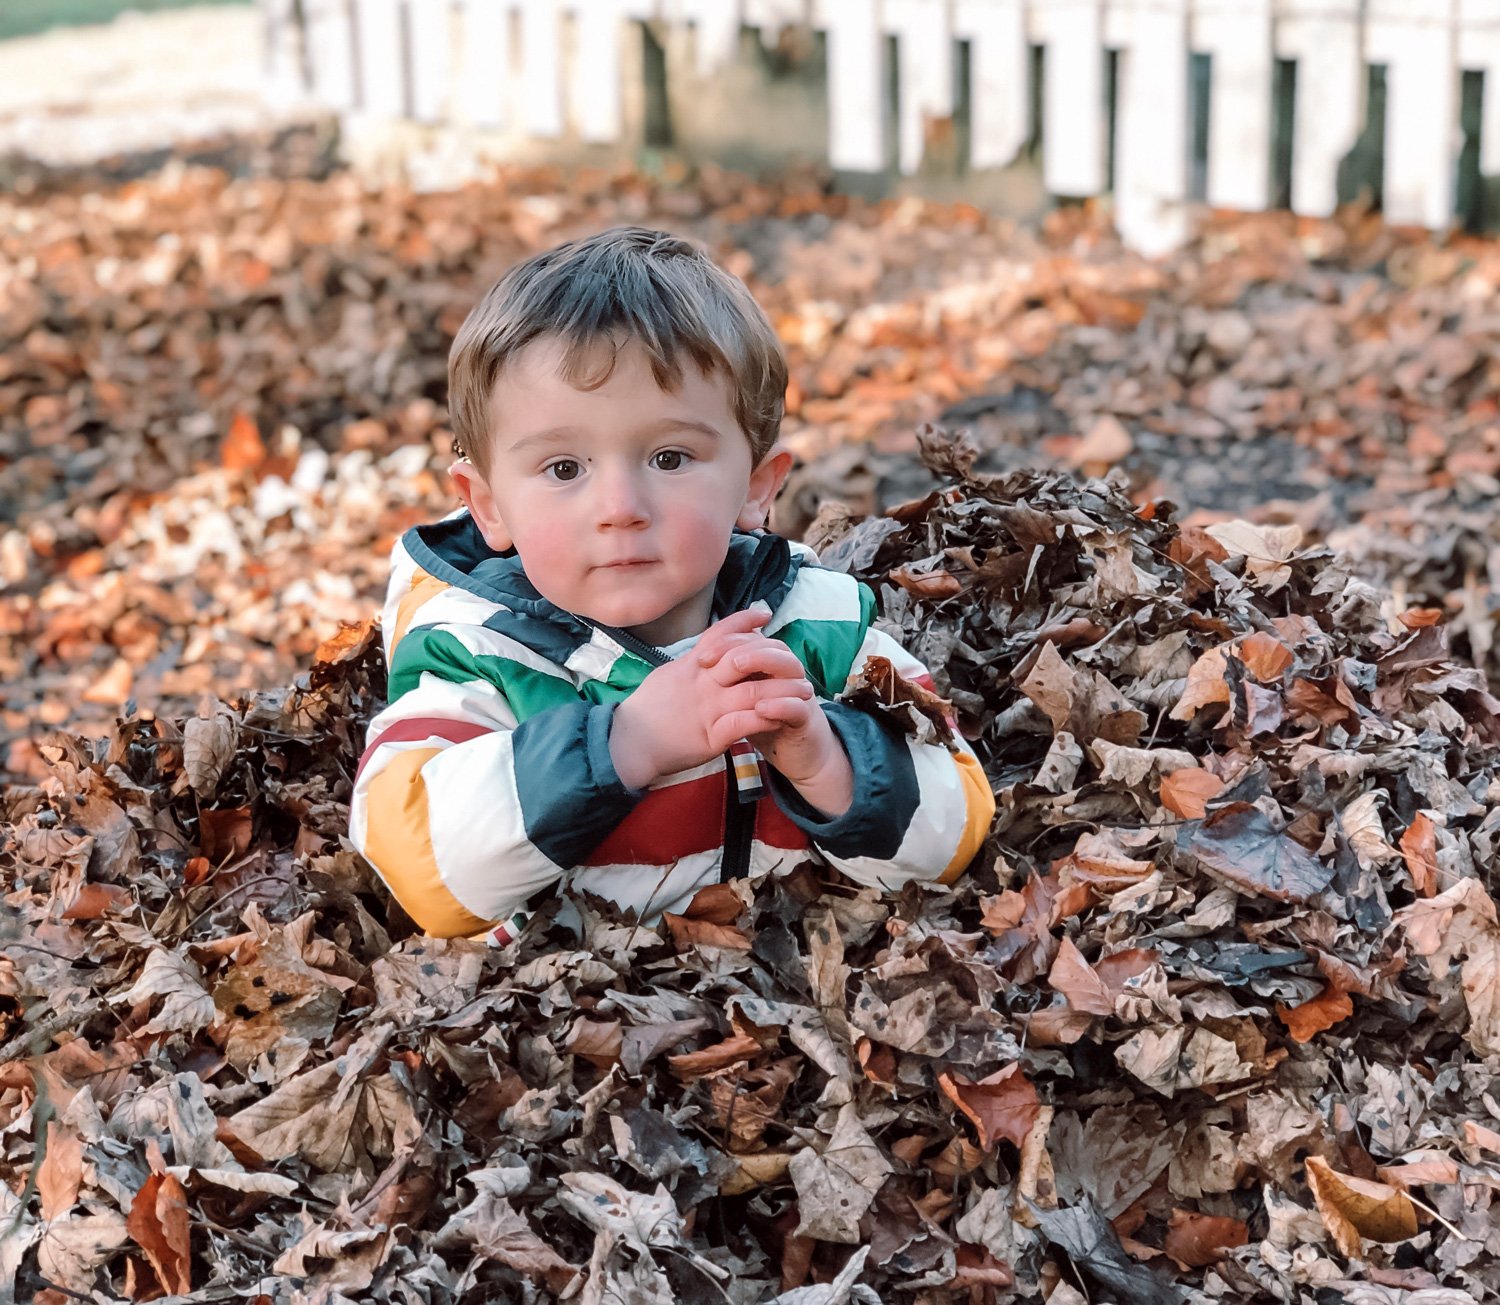 Max in the autumn leaves, October 2019